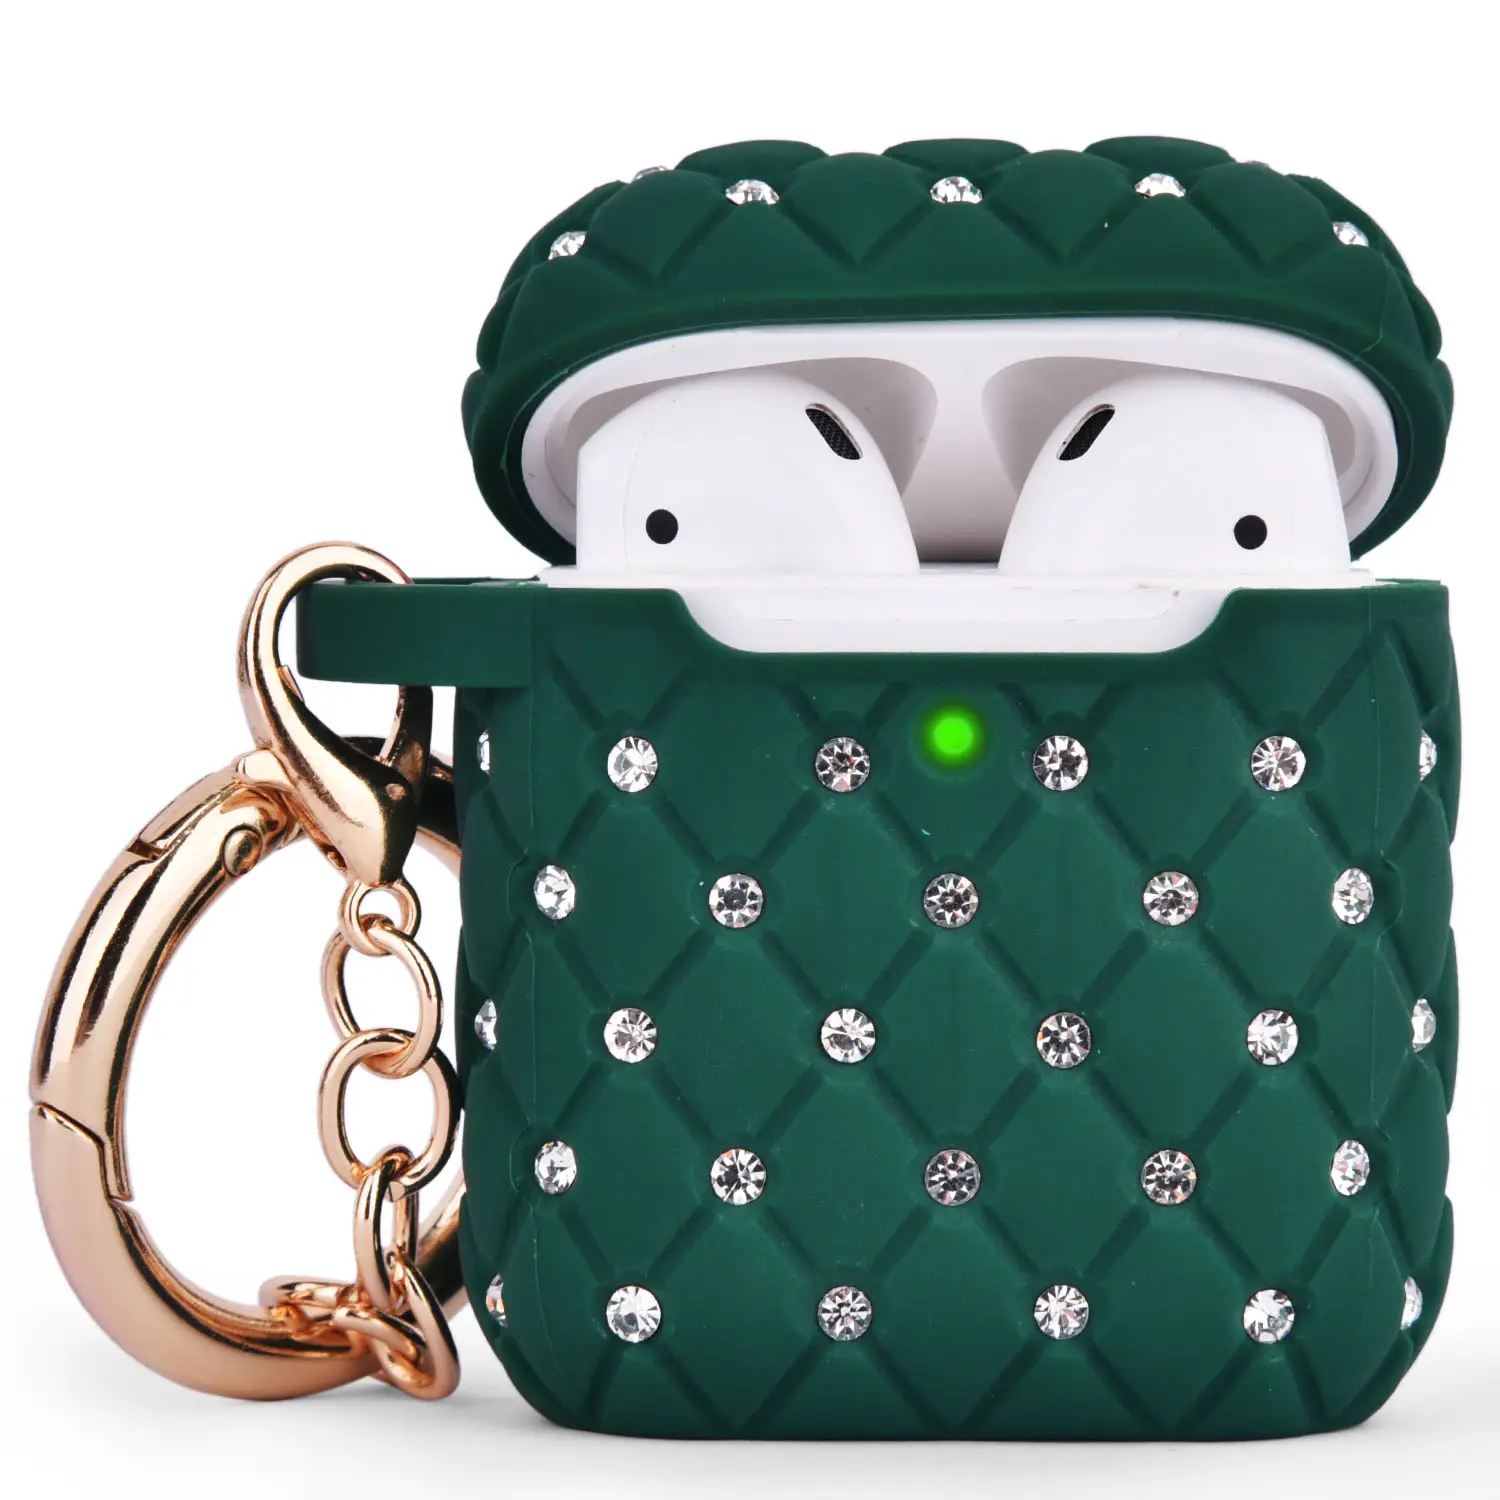 TPU Inlaid Rhinestone AirPods Keychain Cases For Apple Airpods 2 Case Cover With Cheap Shipping